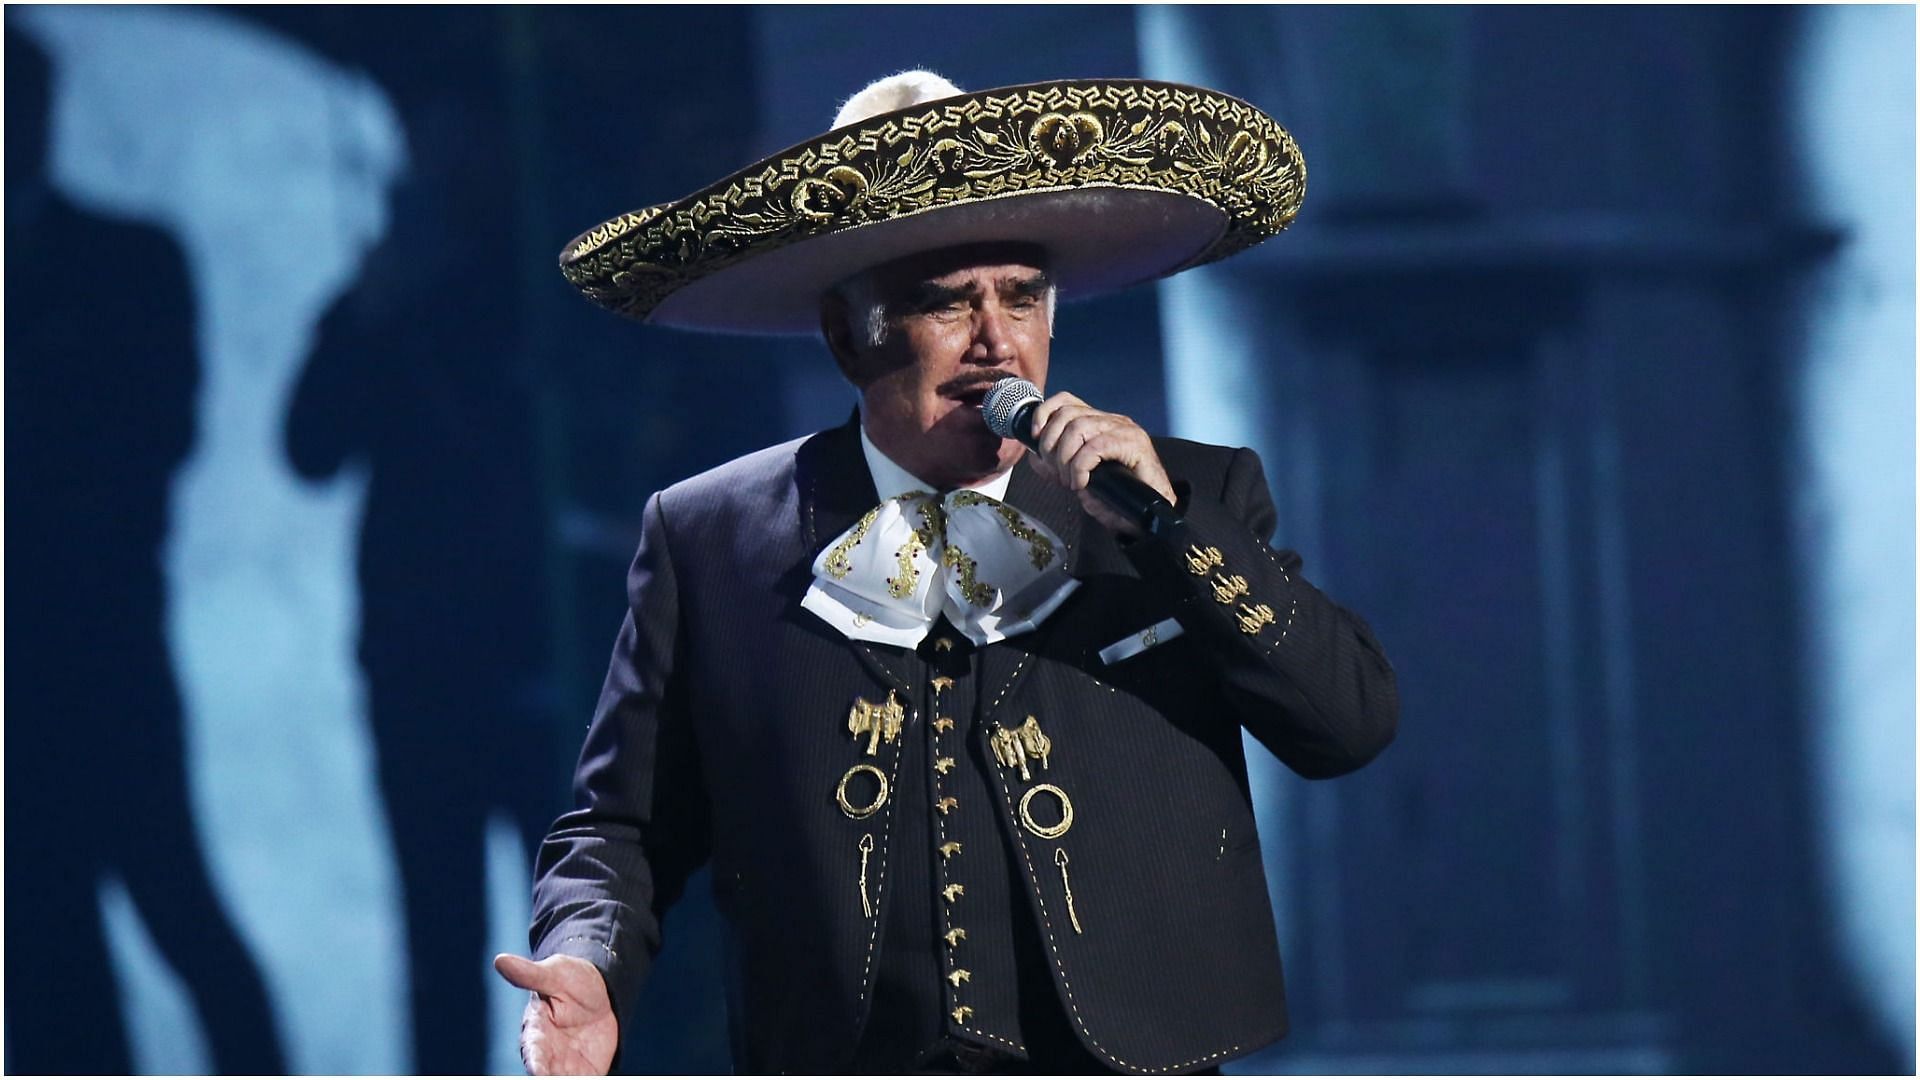 Vicente Fern&aacute;ndez died at the age of 81 (Image by Michael Tran via Getty Images)